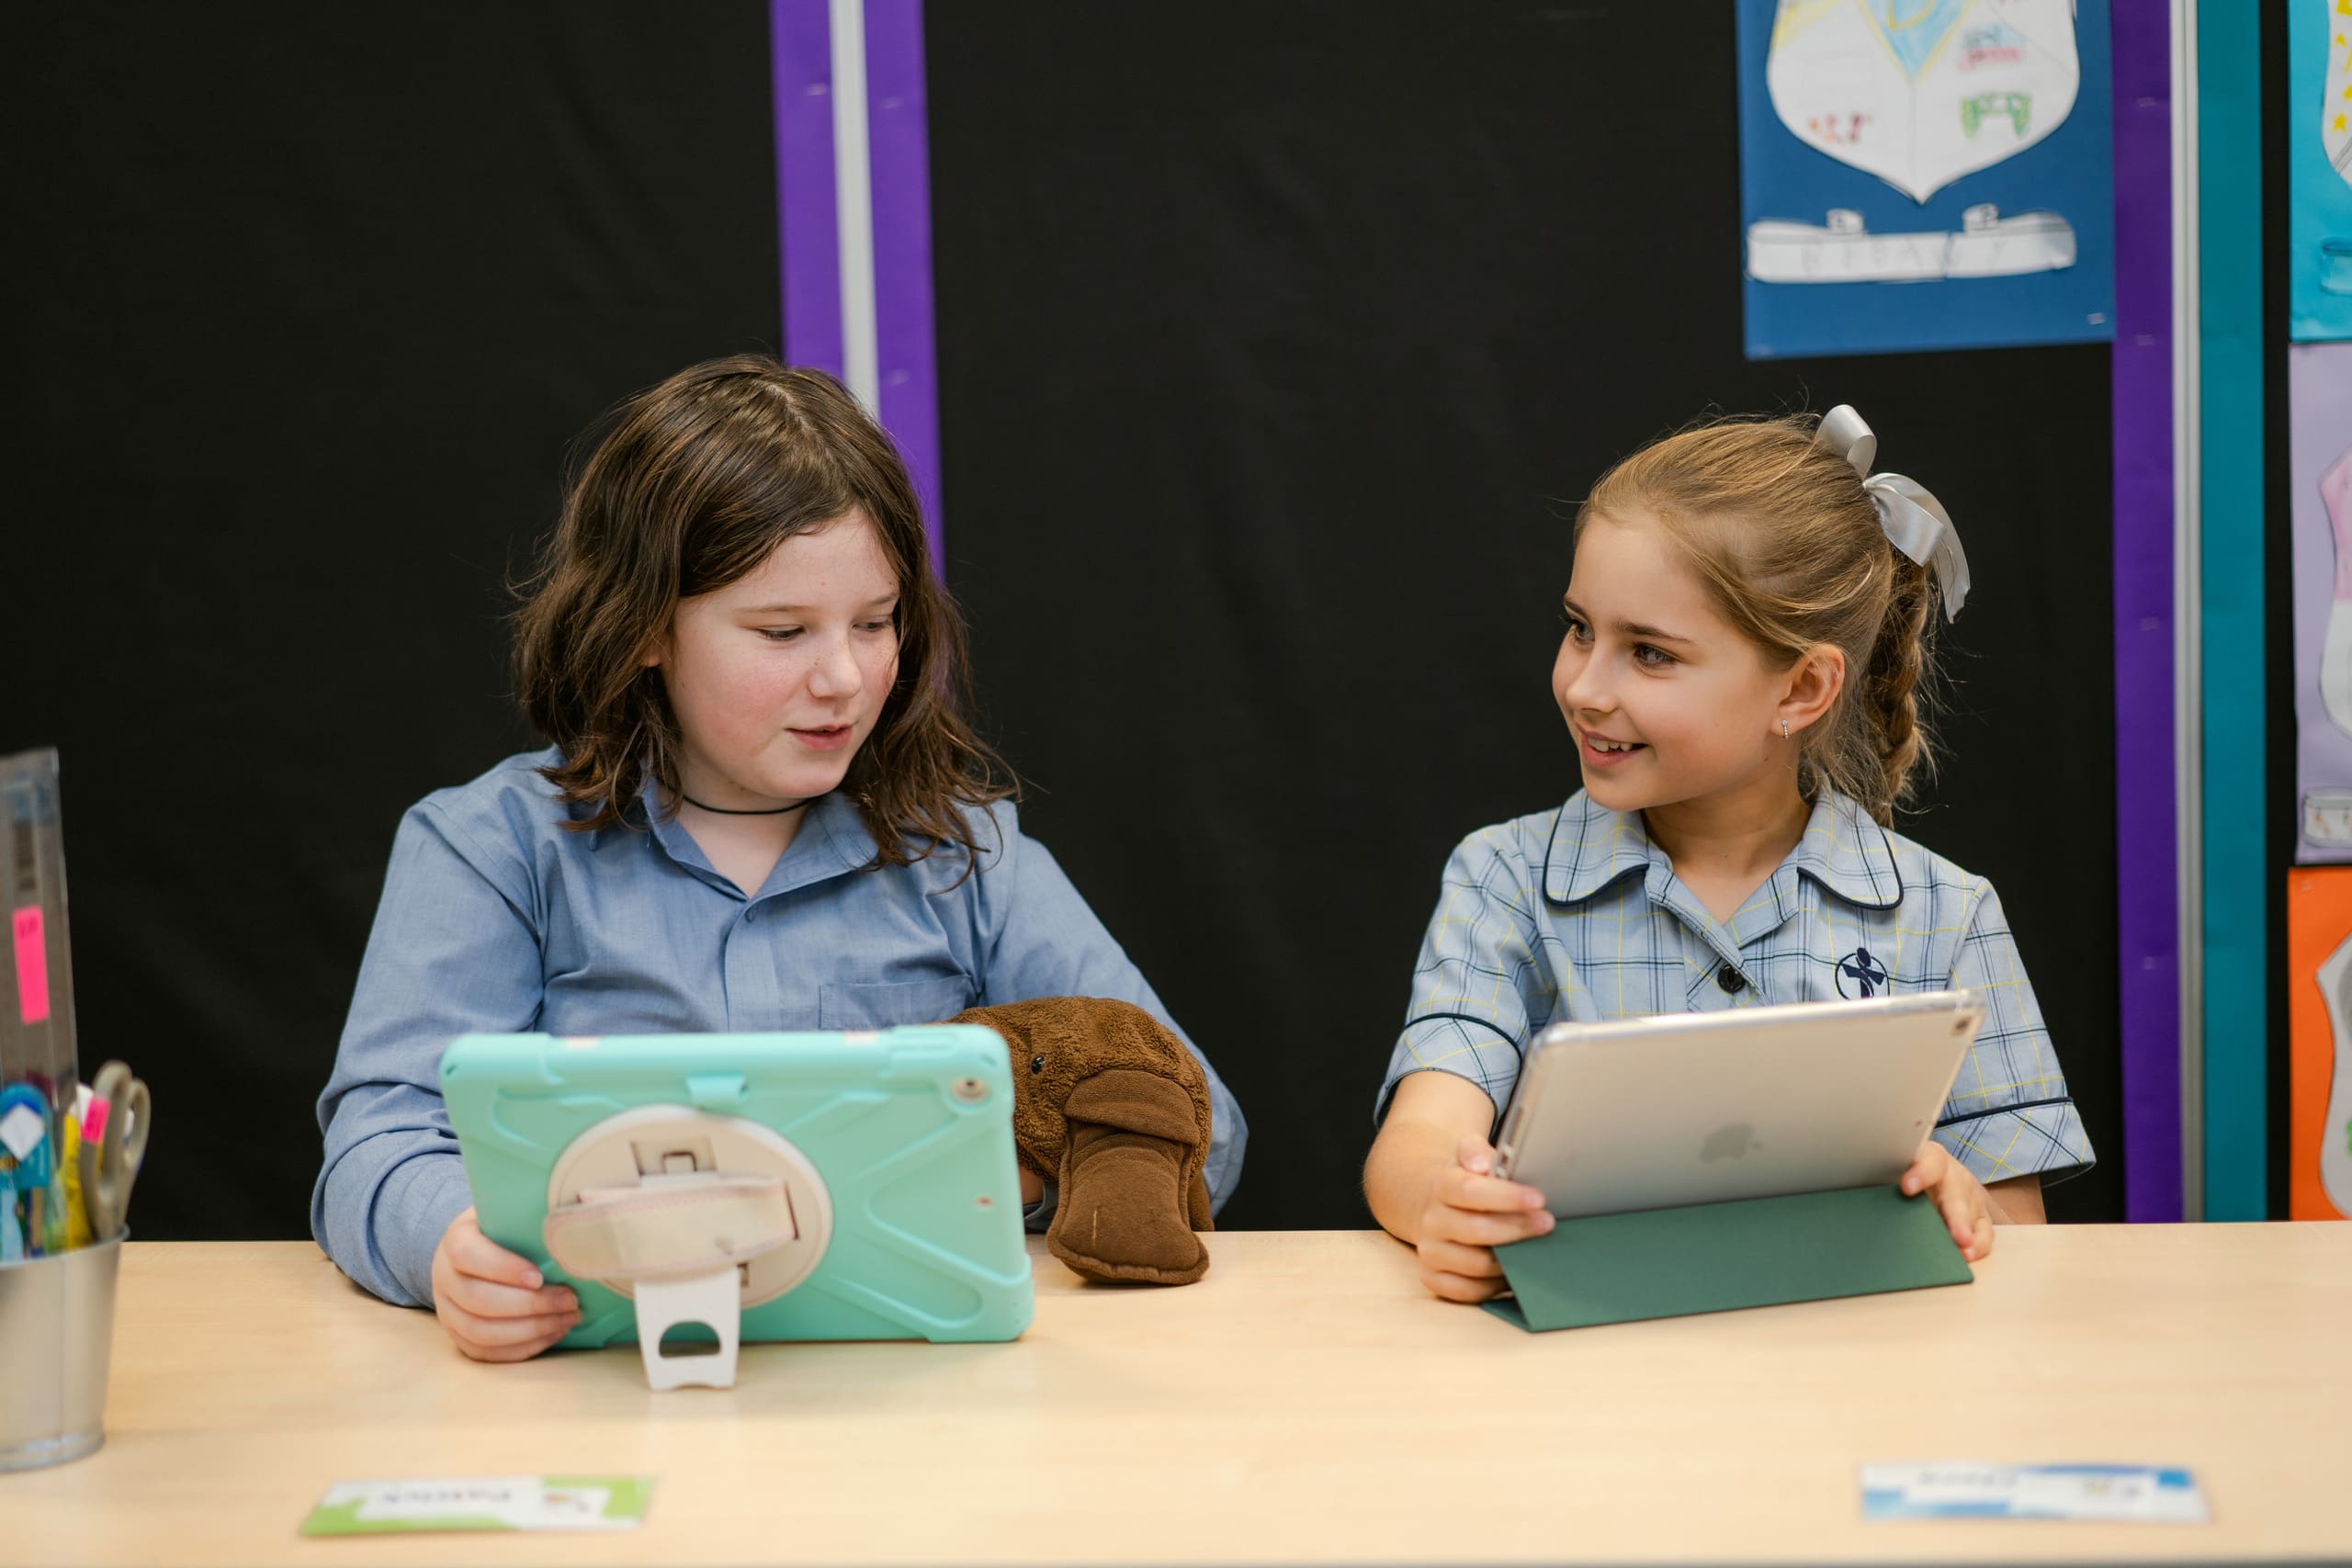 Two students at a desk using Ipads. They are smiling at each other.